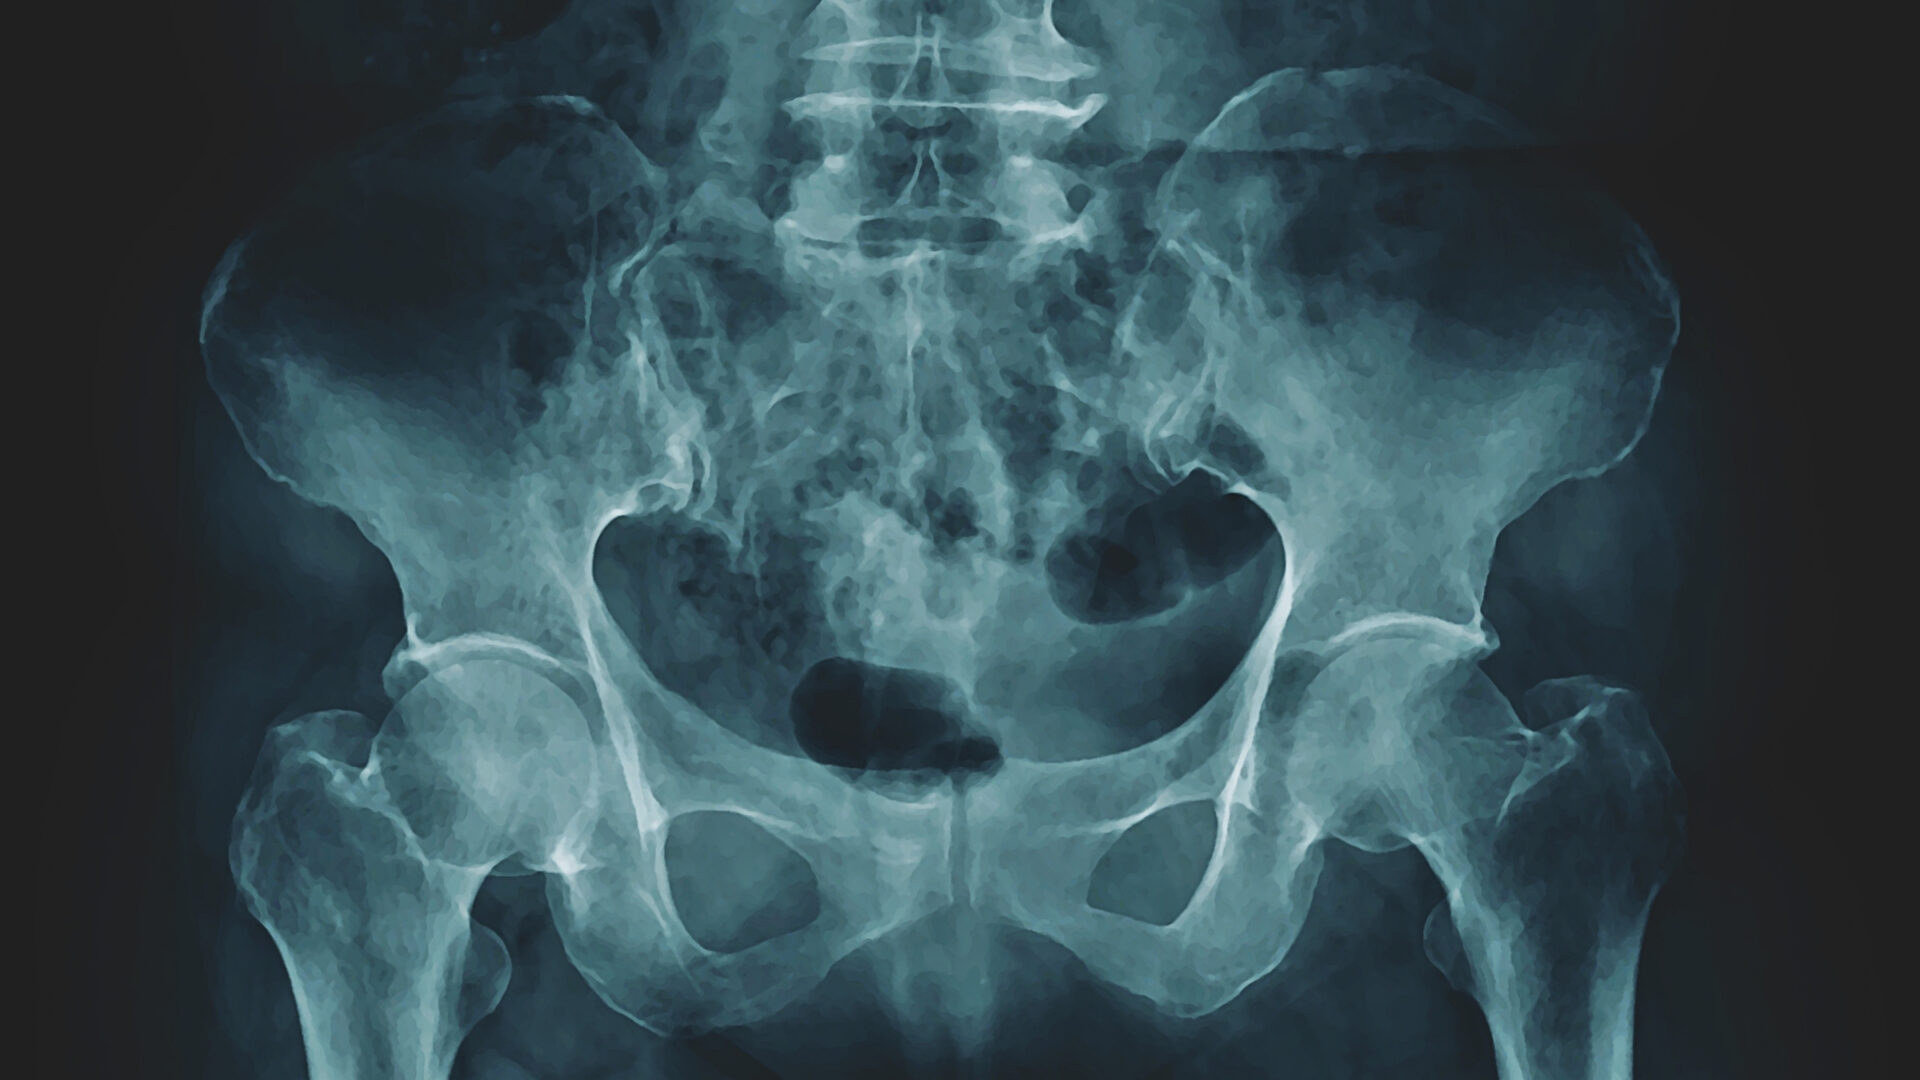 X-ray of a pelvis.